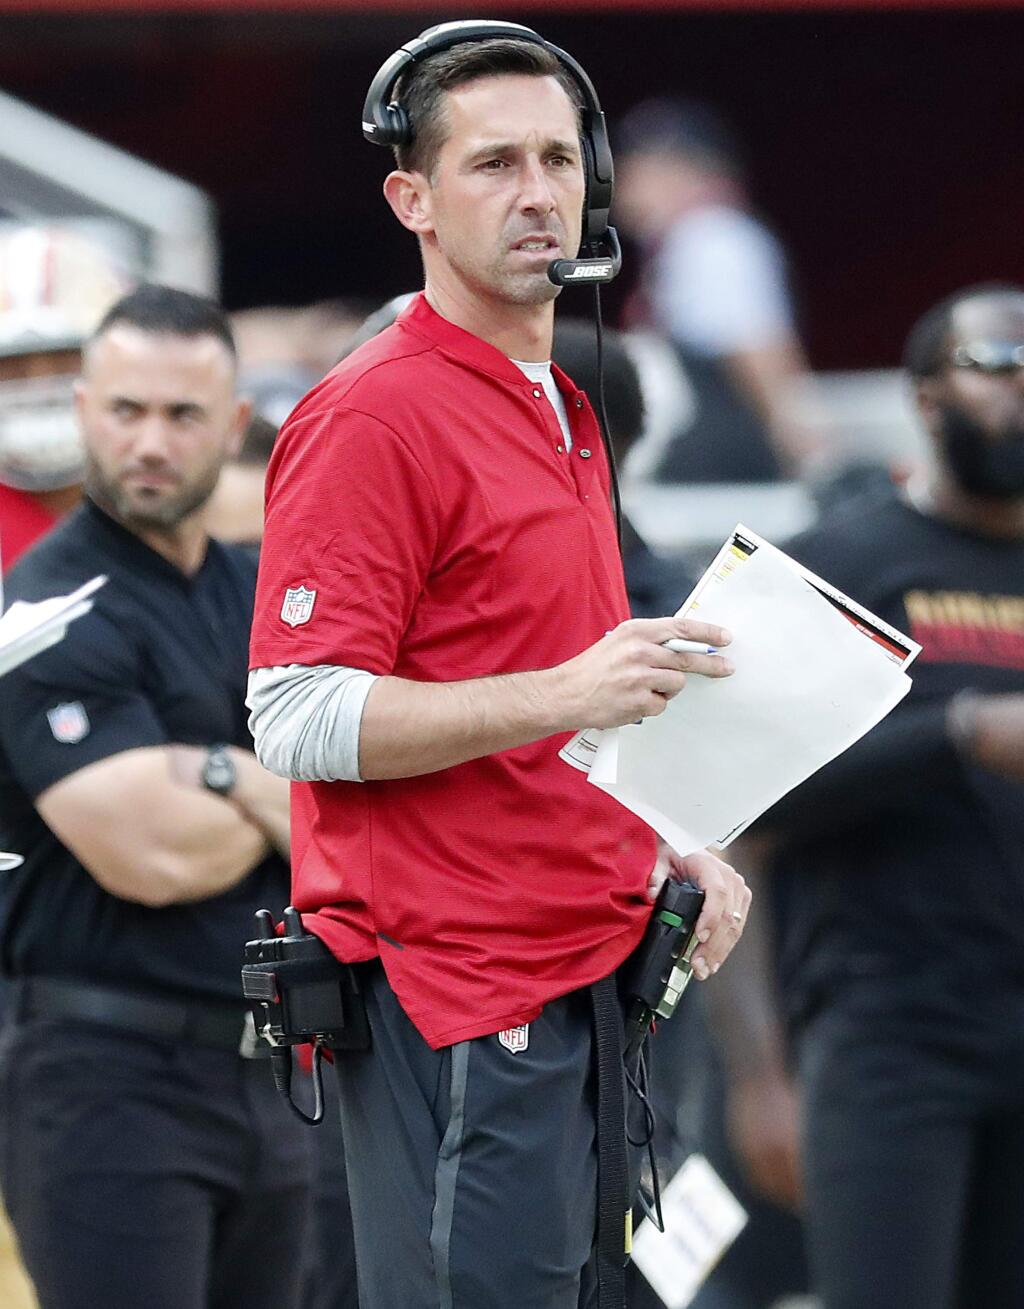 San Francisco 49ers head coach Kyle Shanahan watches from the sideline during the second half of an NFL football game against the Arizona Cardinals in Santa Clara, Calif., Sunday, Oct. 7, 2018. (AP Photo/Tony Avelar)